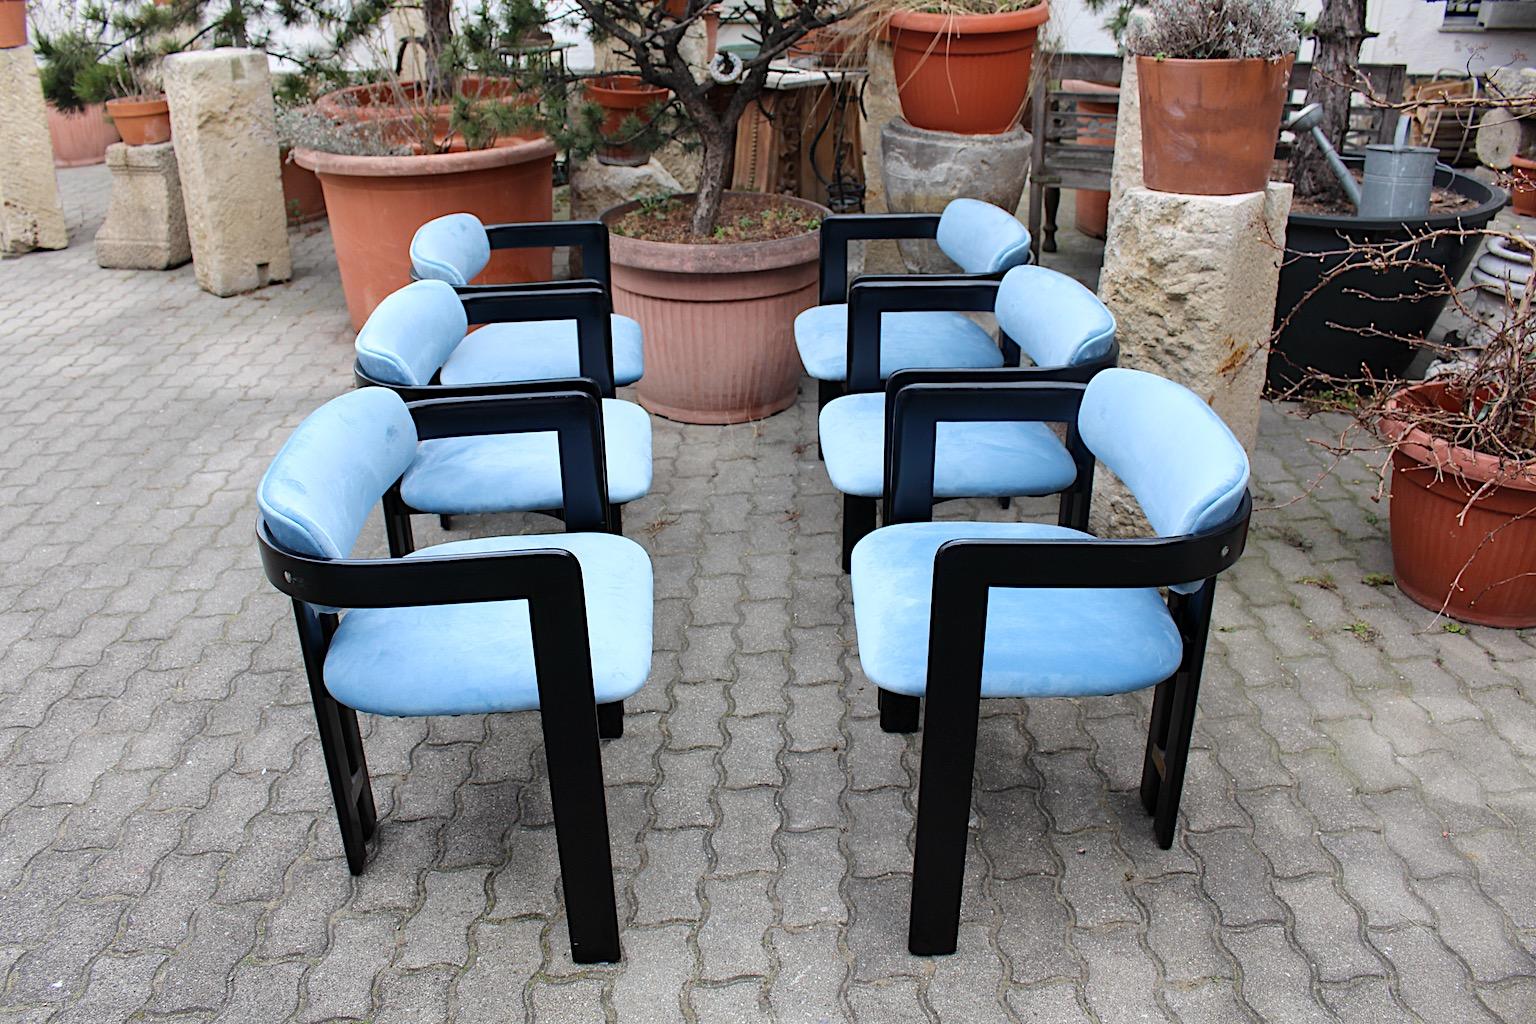 Mid-Century Modern vintage sculptural set of 6 dining chairs Pamplona by Augusto Savini for Pozzi Italy circa 1965.
Six dining chairs model Pamplona from black lacquered wood and reupholstered seat and back in blue color tone with velvet textile